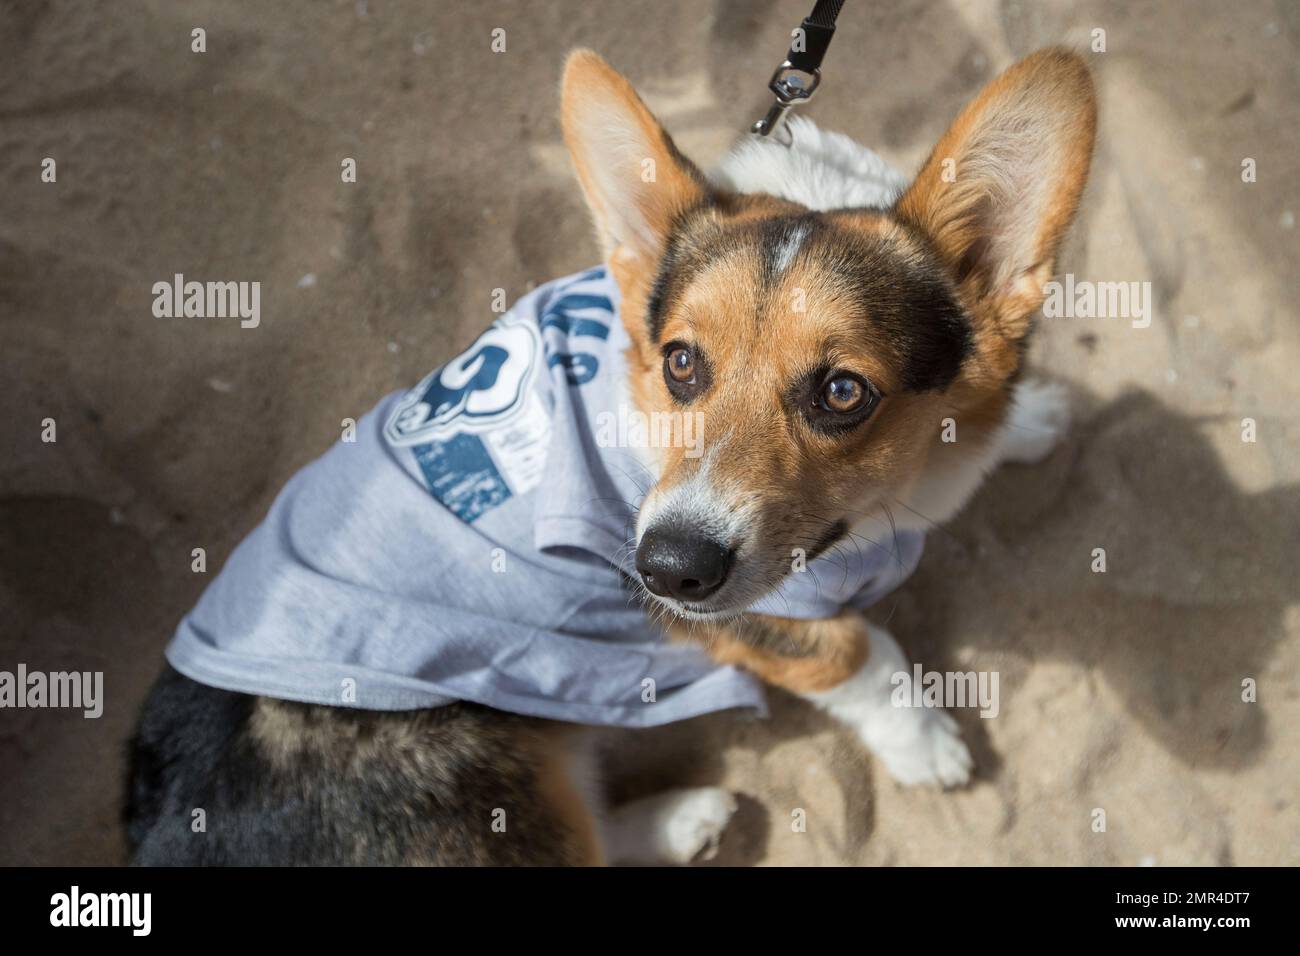 IMAGE DISTRIBUTED FOR NFL - A corgi dog dressed in Los Angeles Rams pet gear  participates in a fashion show at NFL Corgi Beach Day, Saturday, Oct. 28,  2017 in Huntington Beach,